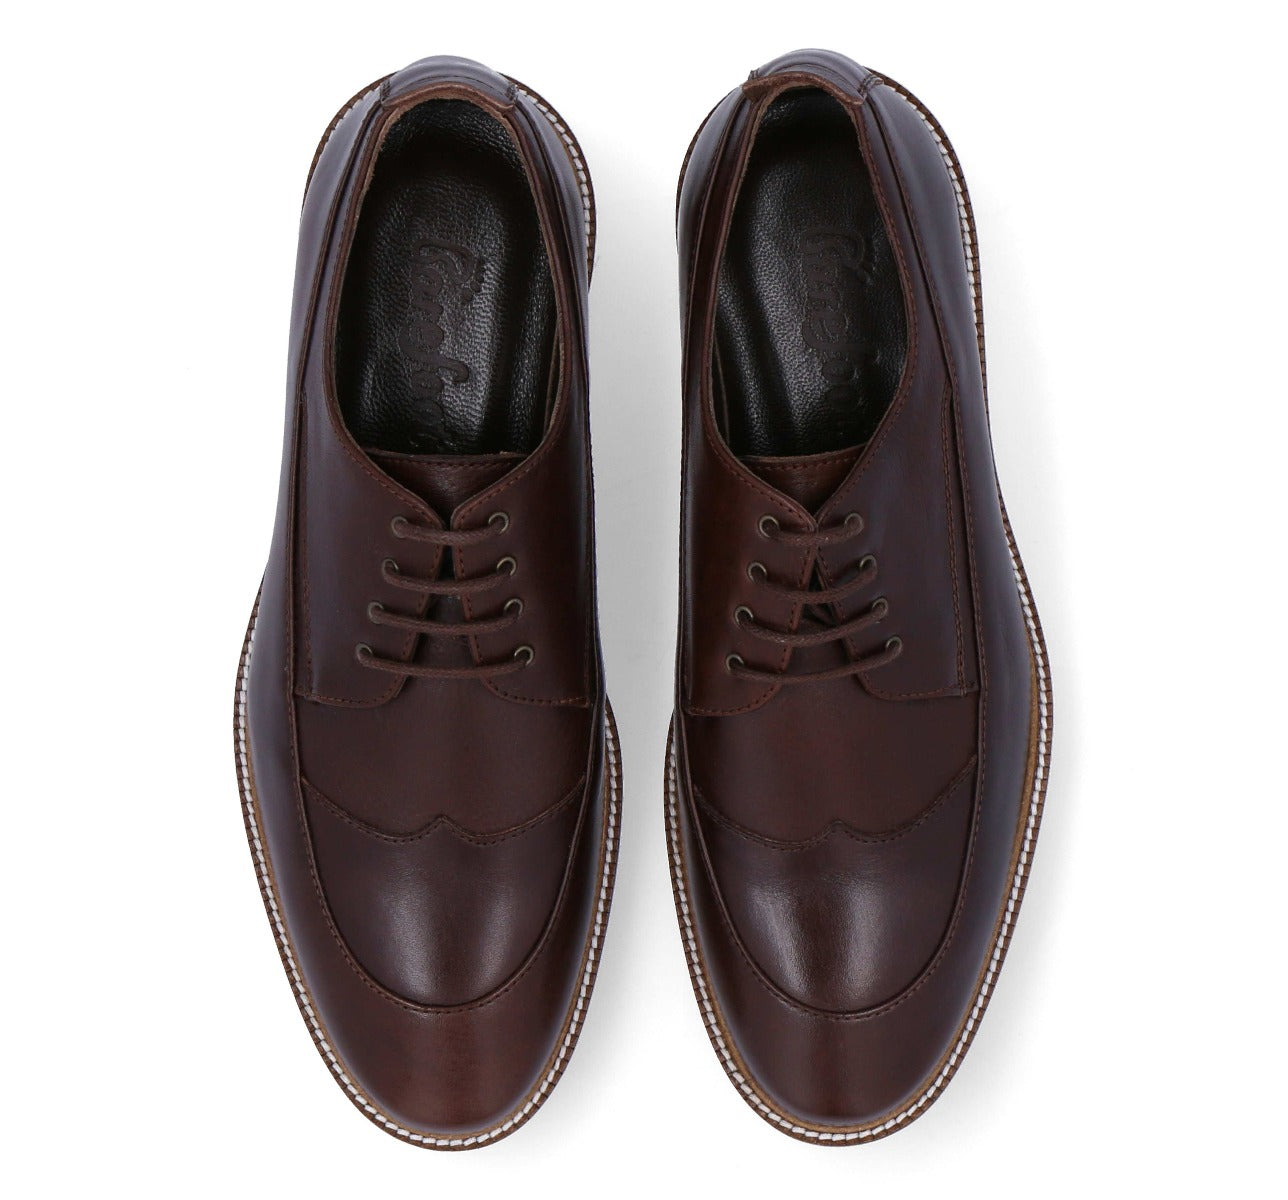 Barefoot Brown Lace Up with White Sole For Men 6134